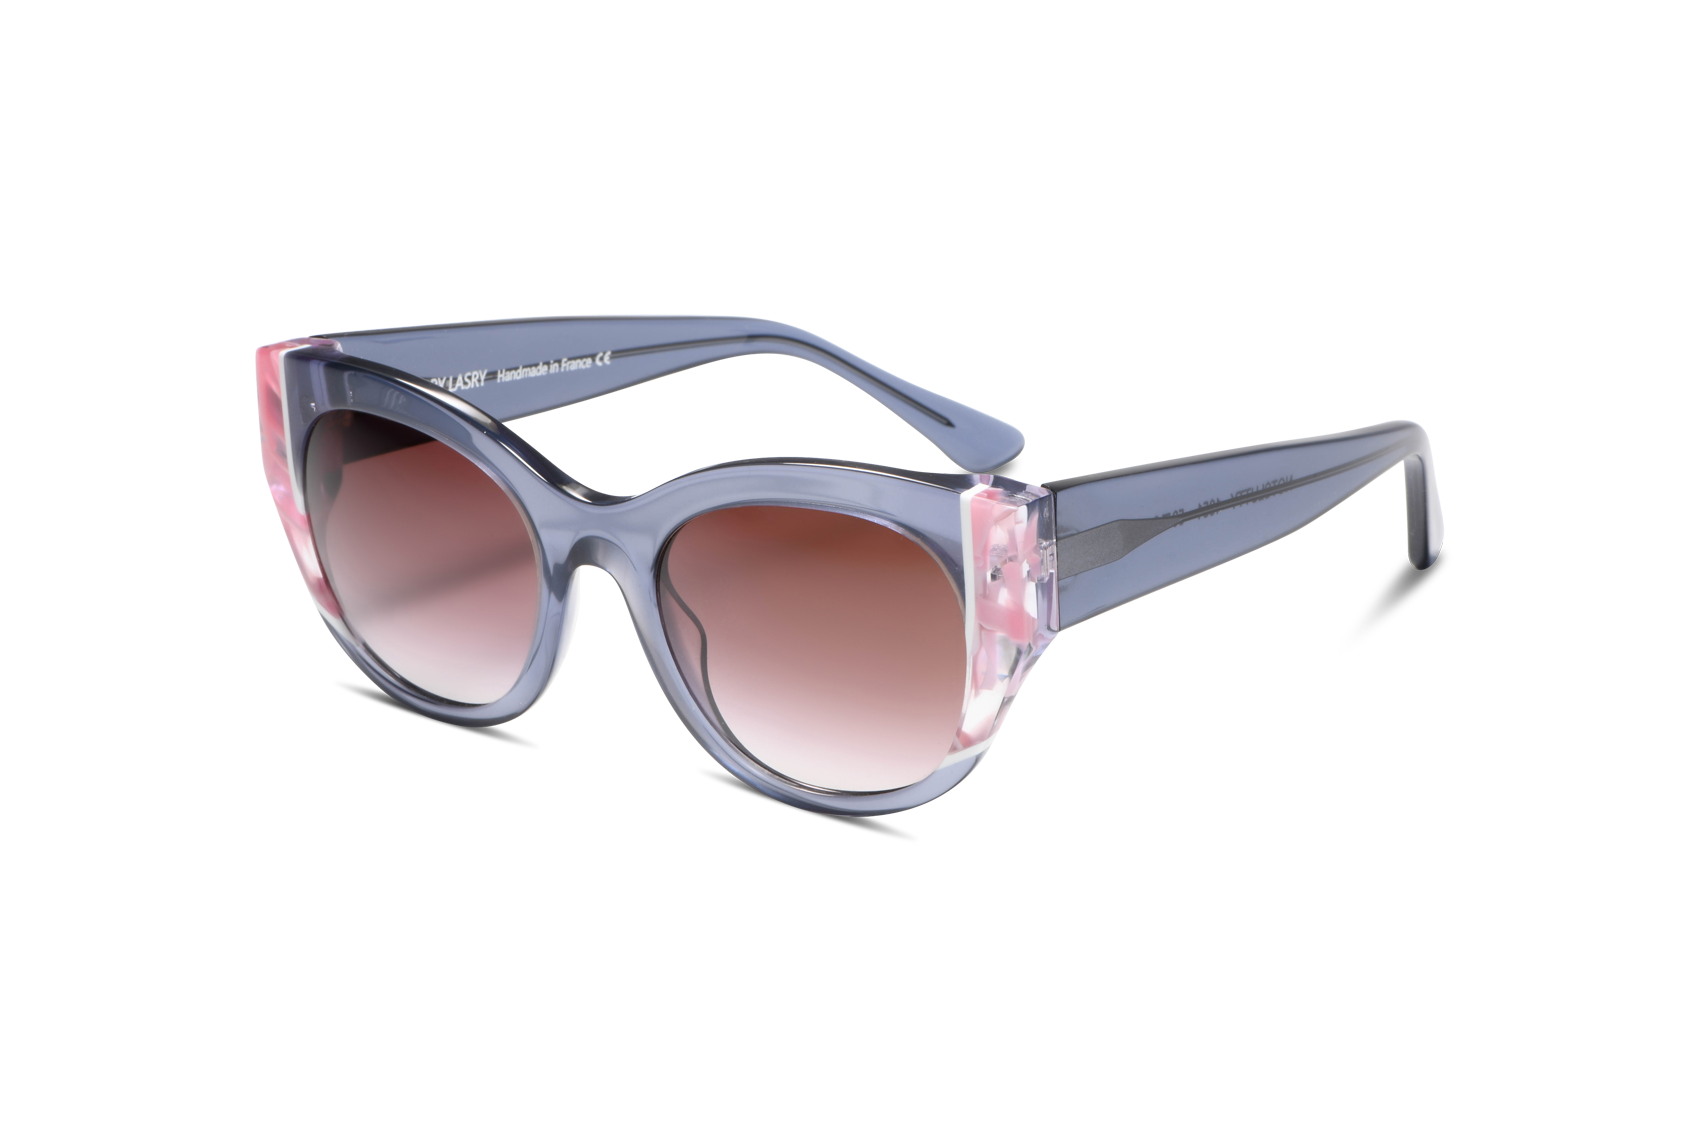 Notslutty by THIERRY LASRY | Try on glasses online & find optician 